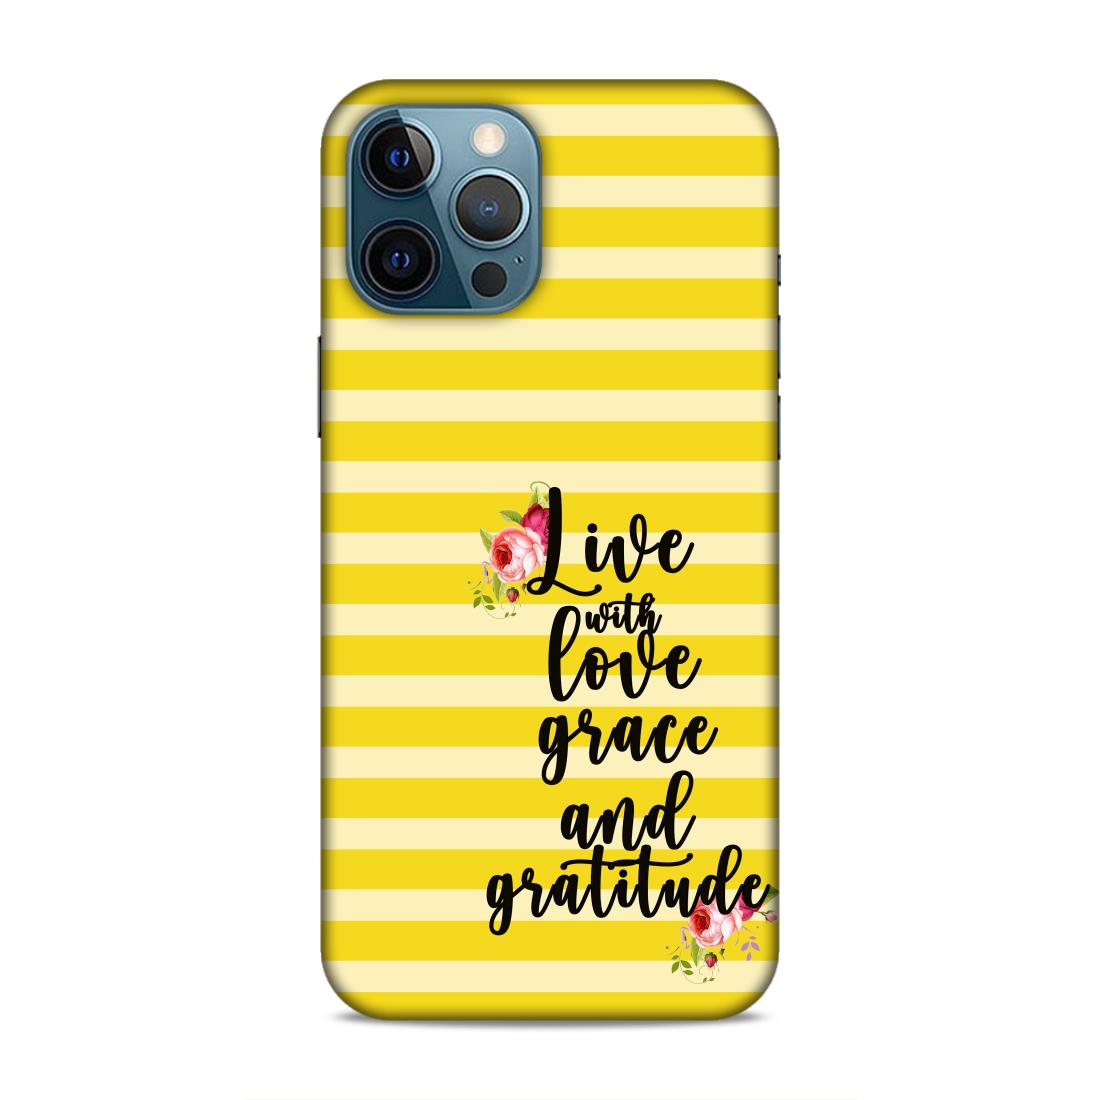 Live with Love Grace and Gratitude Hard Back Case For Apple iPhone 12 Pro Max